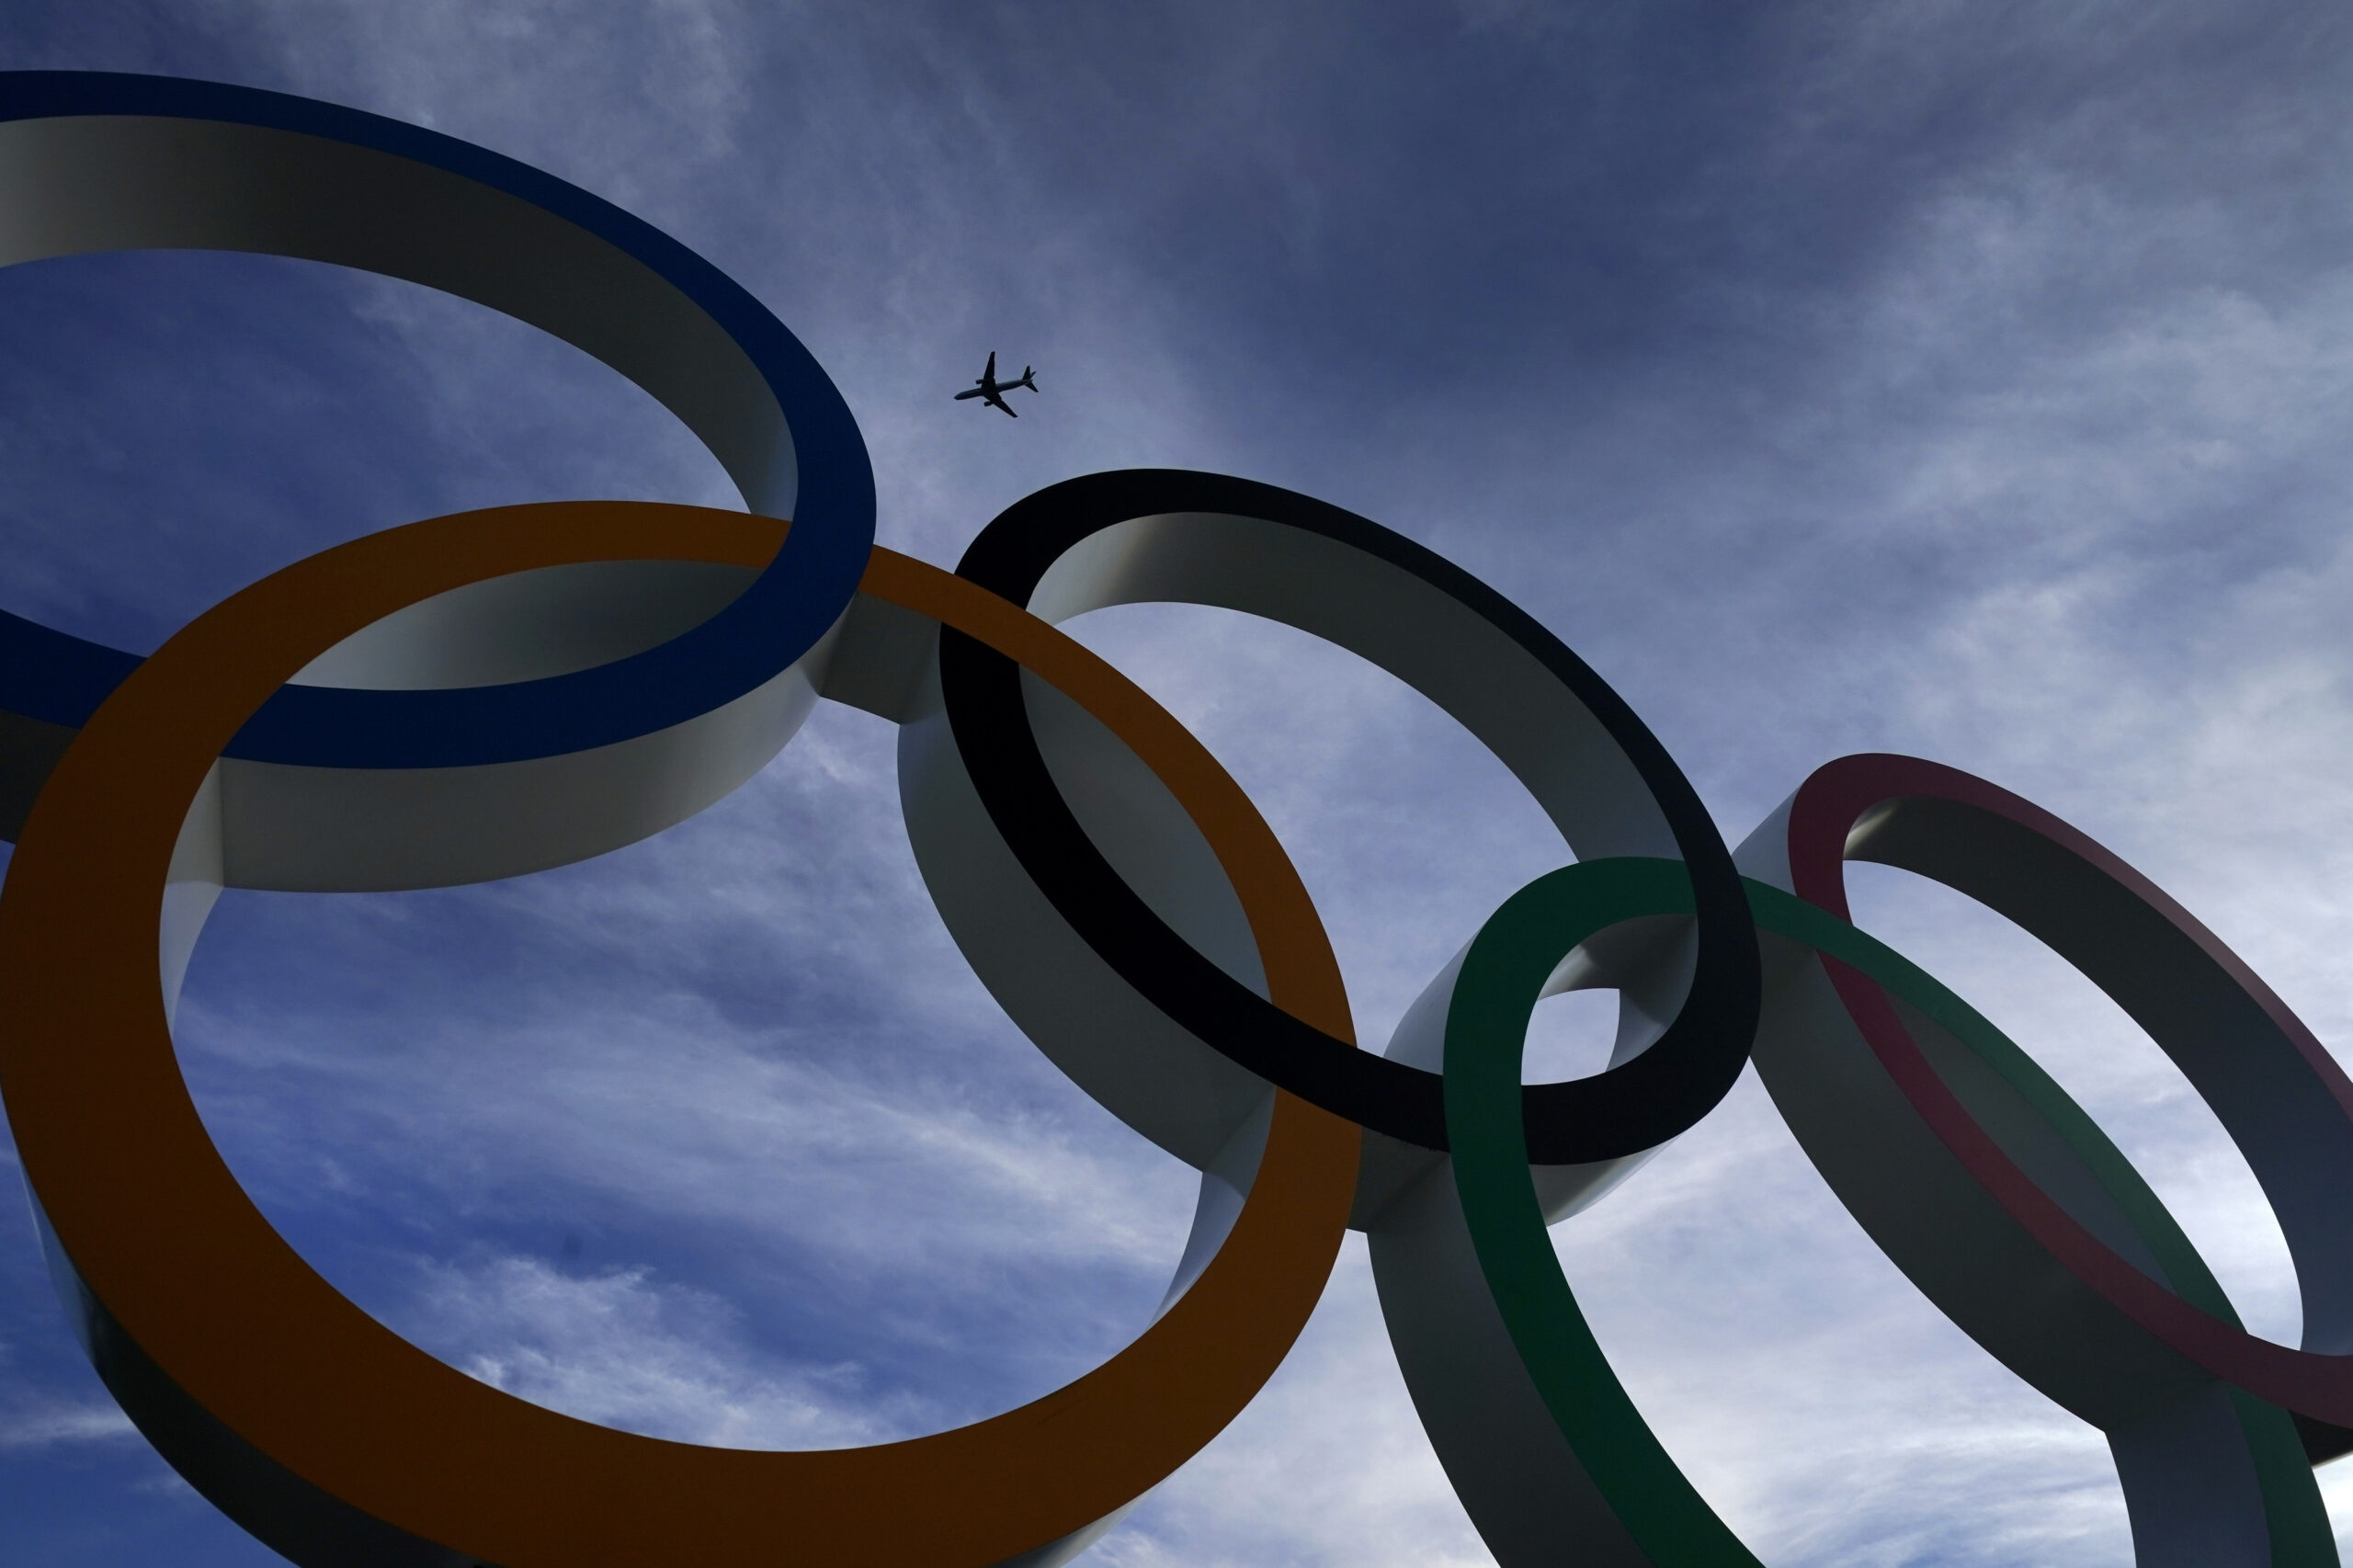 A passenger jet flies over the Olympic rings on display outside the Olympic Stadium